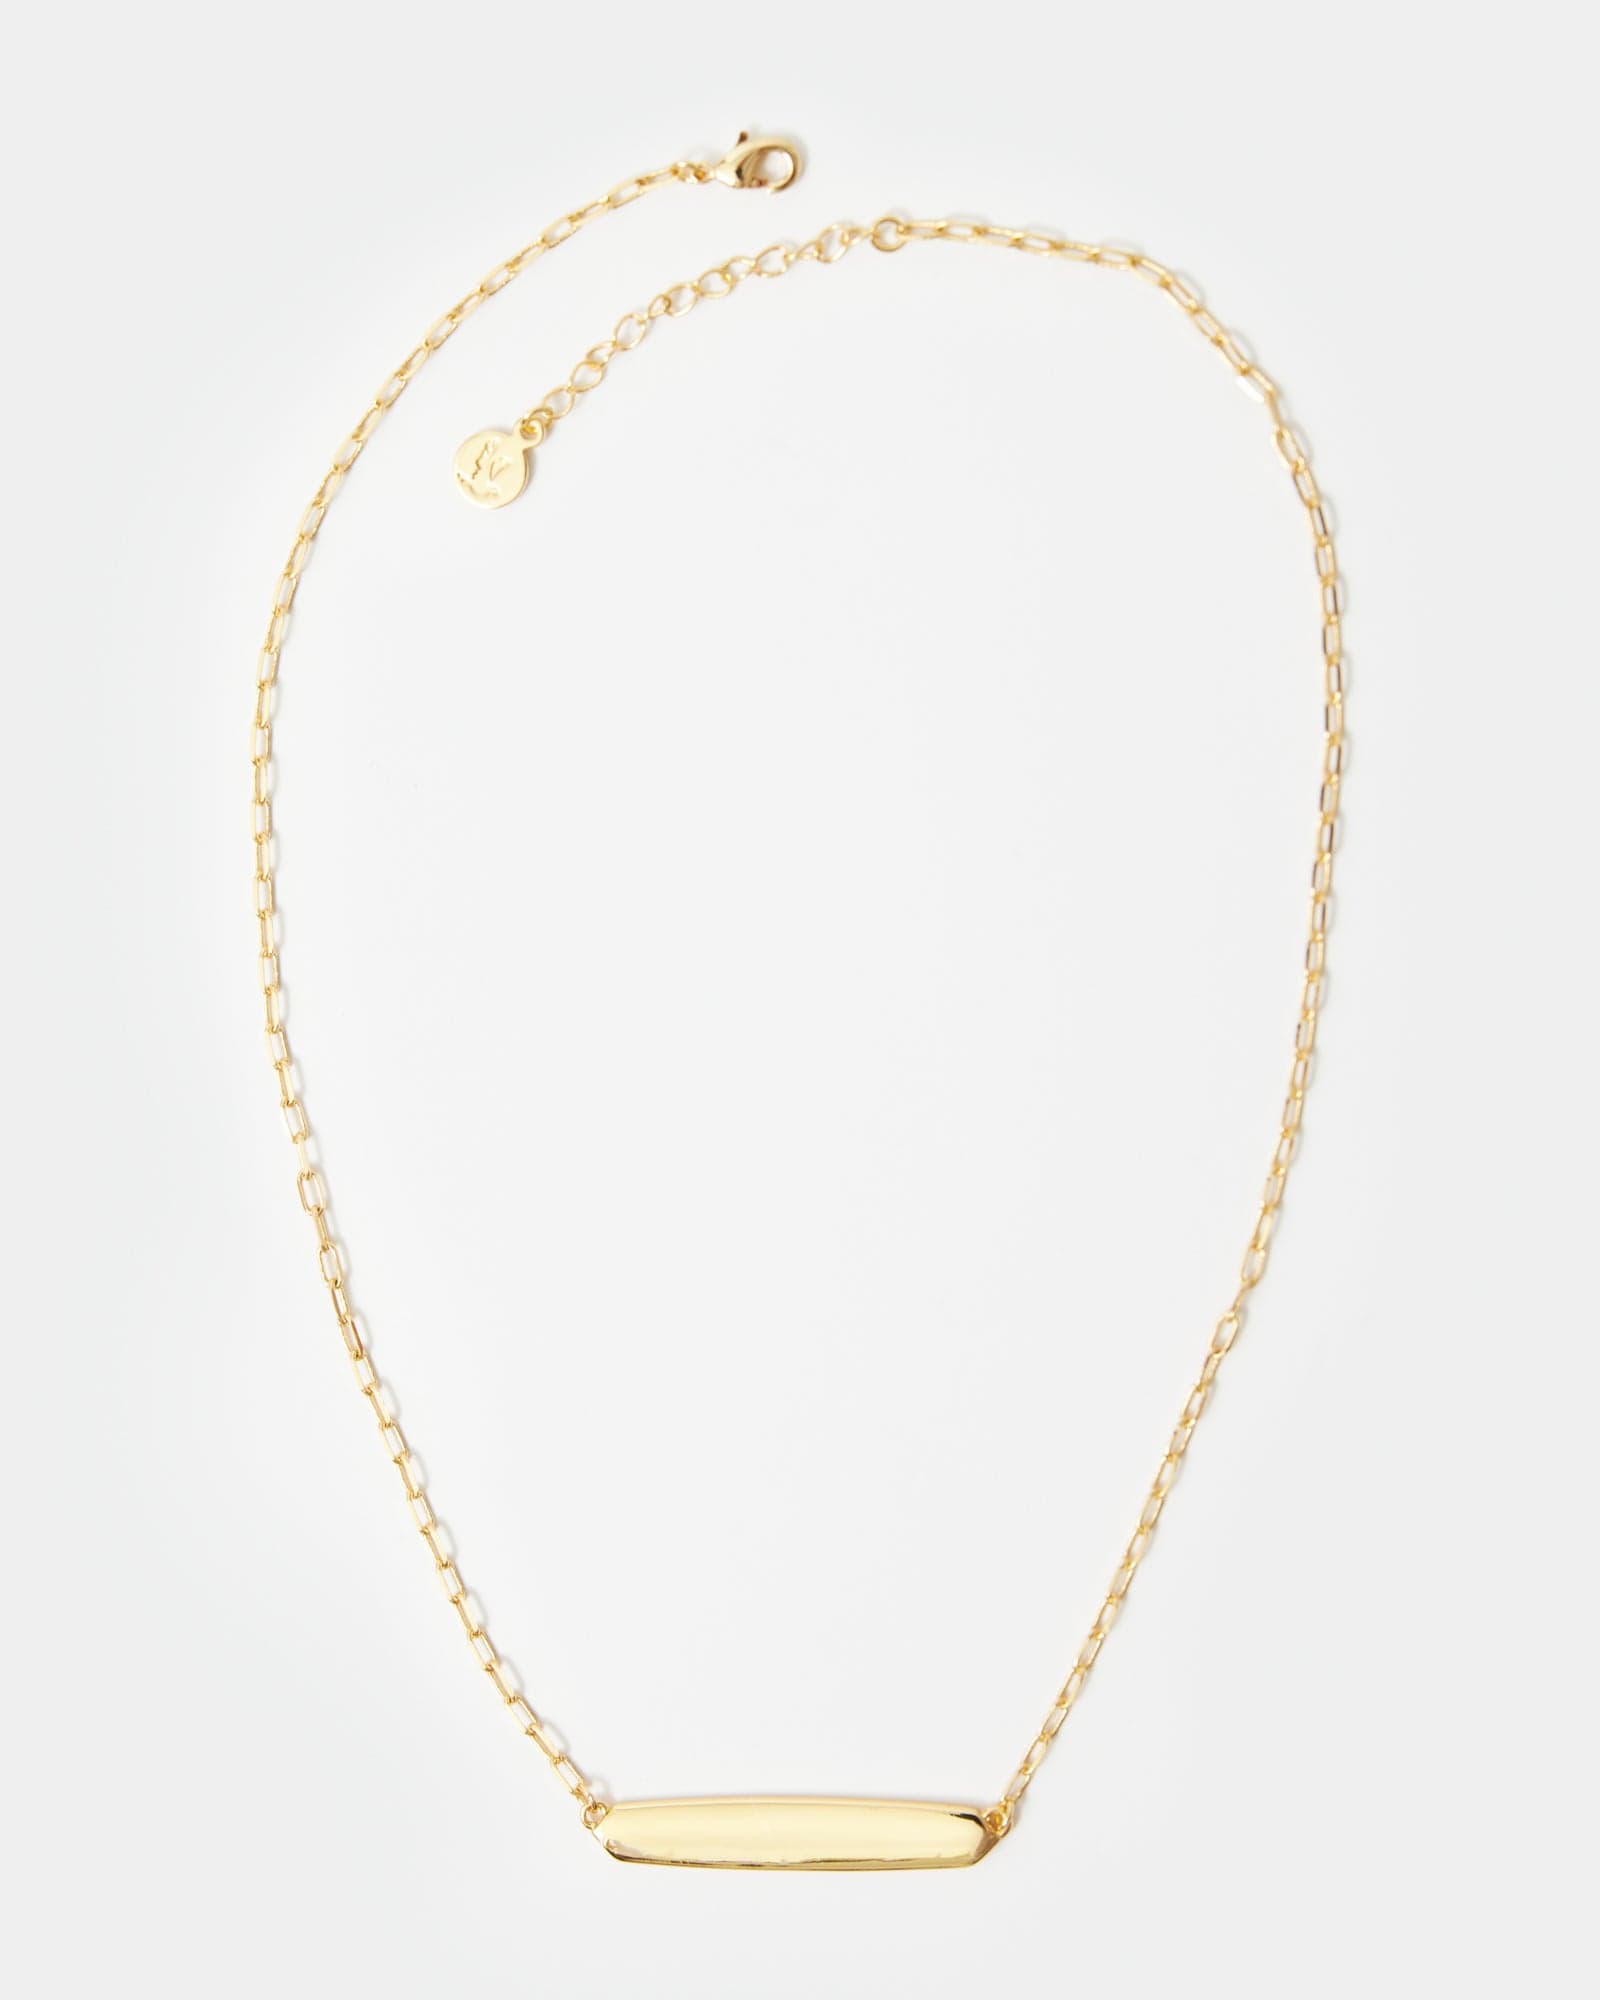 Gold necklace with plain gold bar